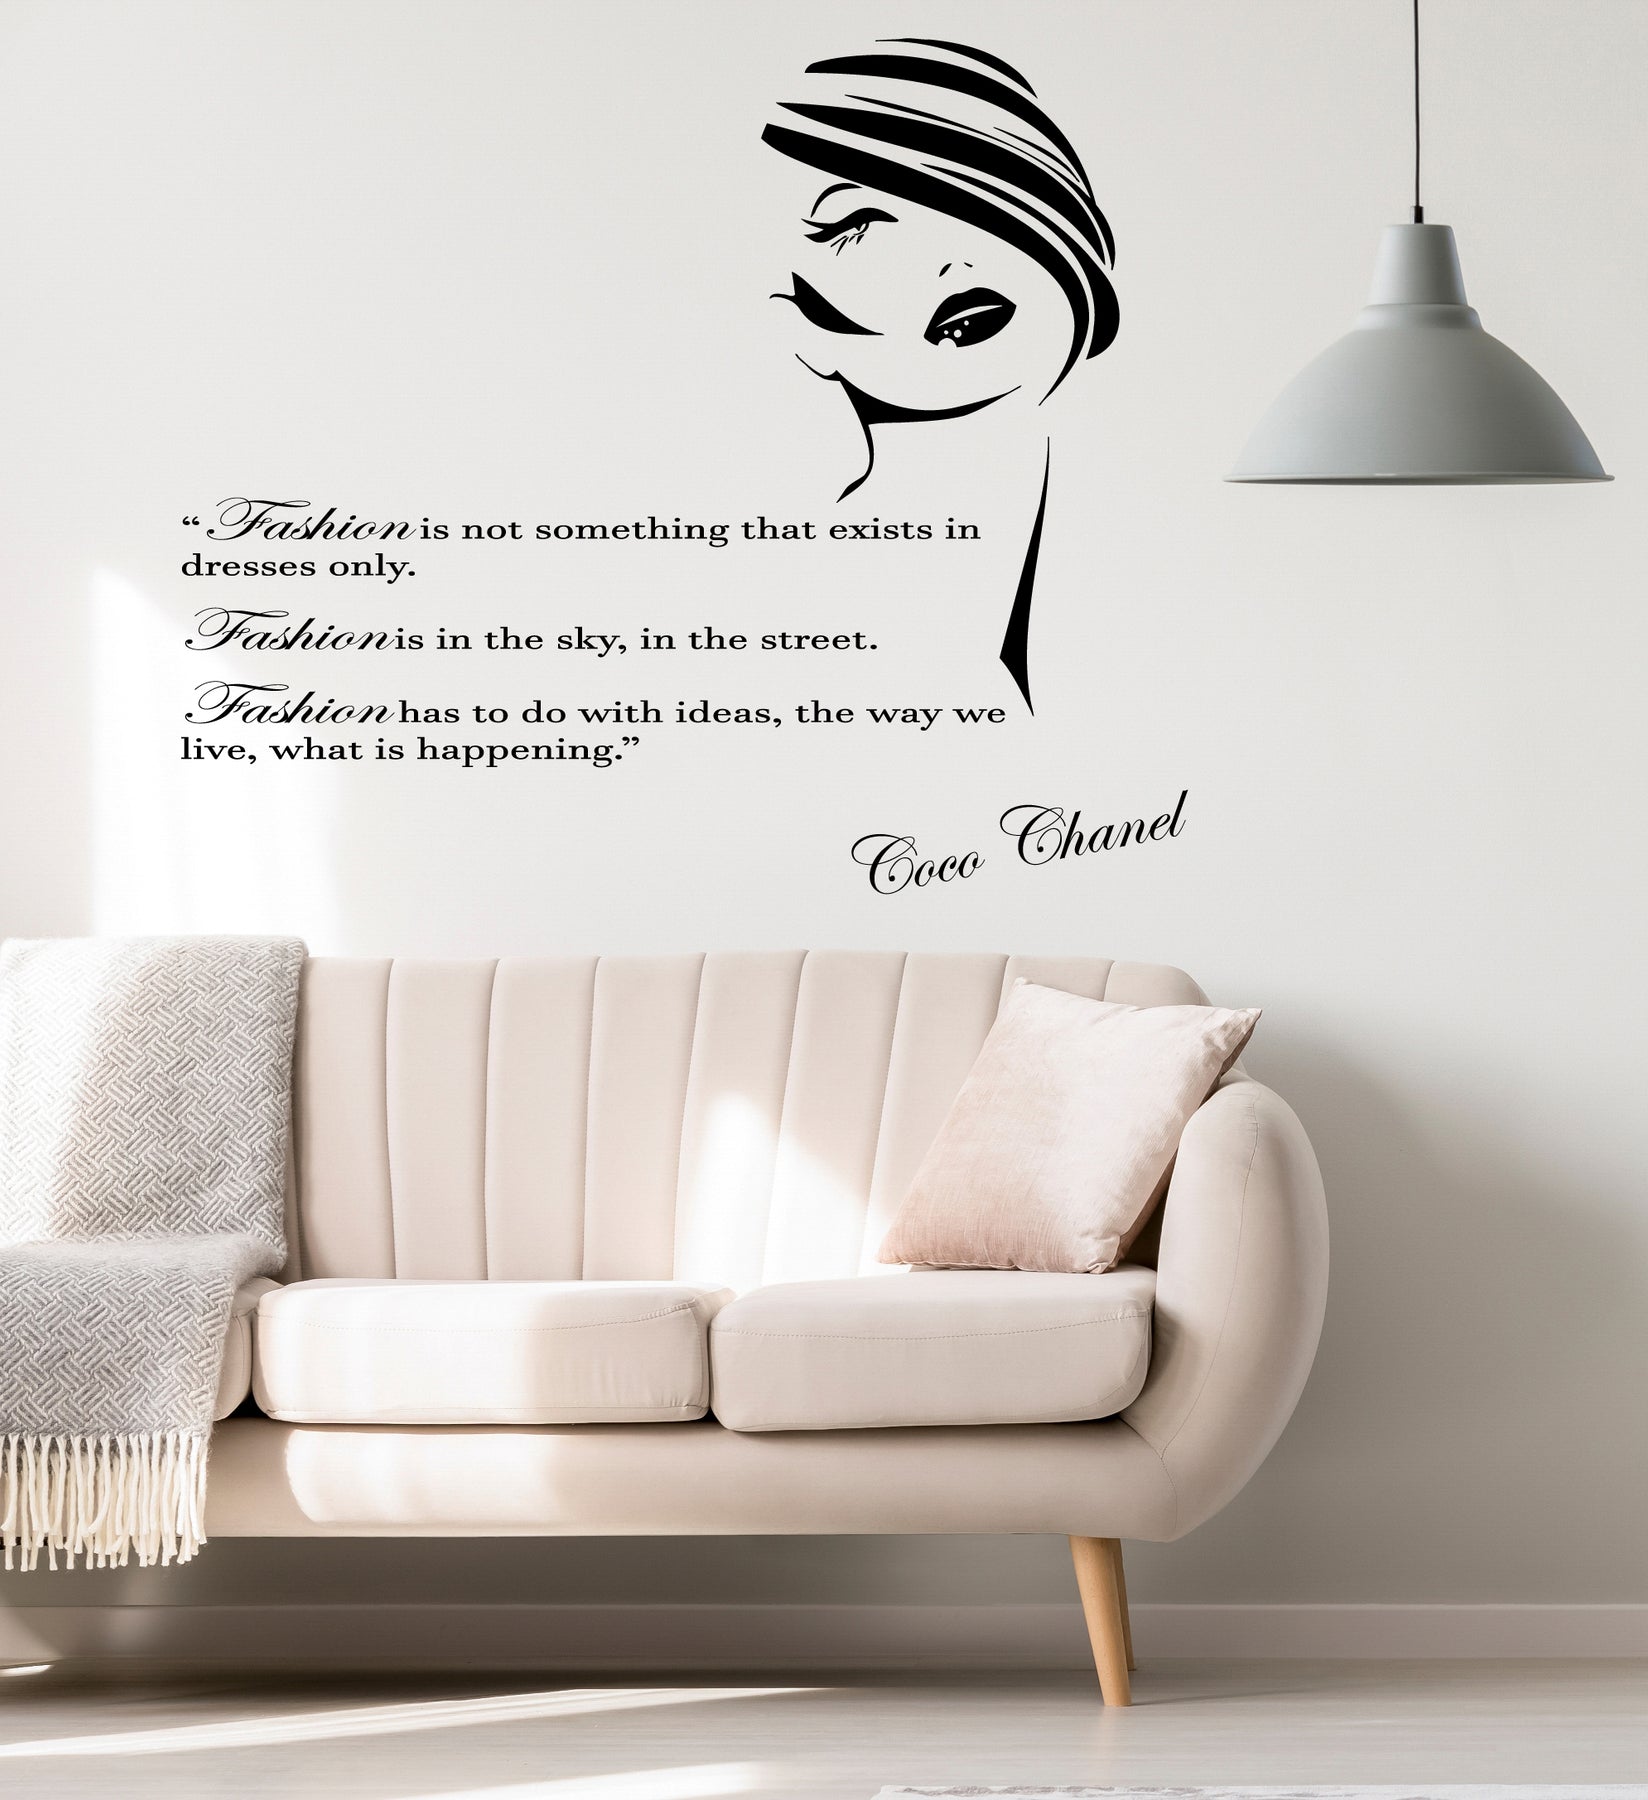  Sticker Beauty Begins The Moment… - Coco Chanel Decor Mural  Motivational Saying Vinyl 30x22 Inches Message for Size : Tools & Home  Improvement